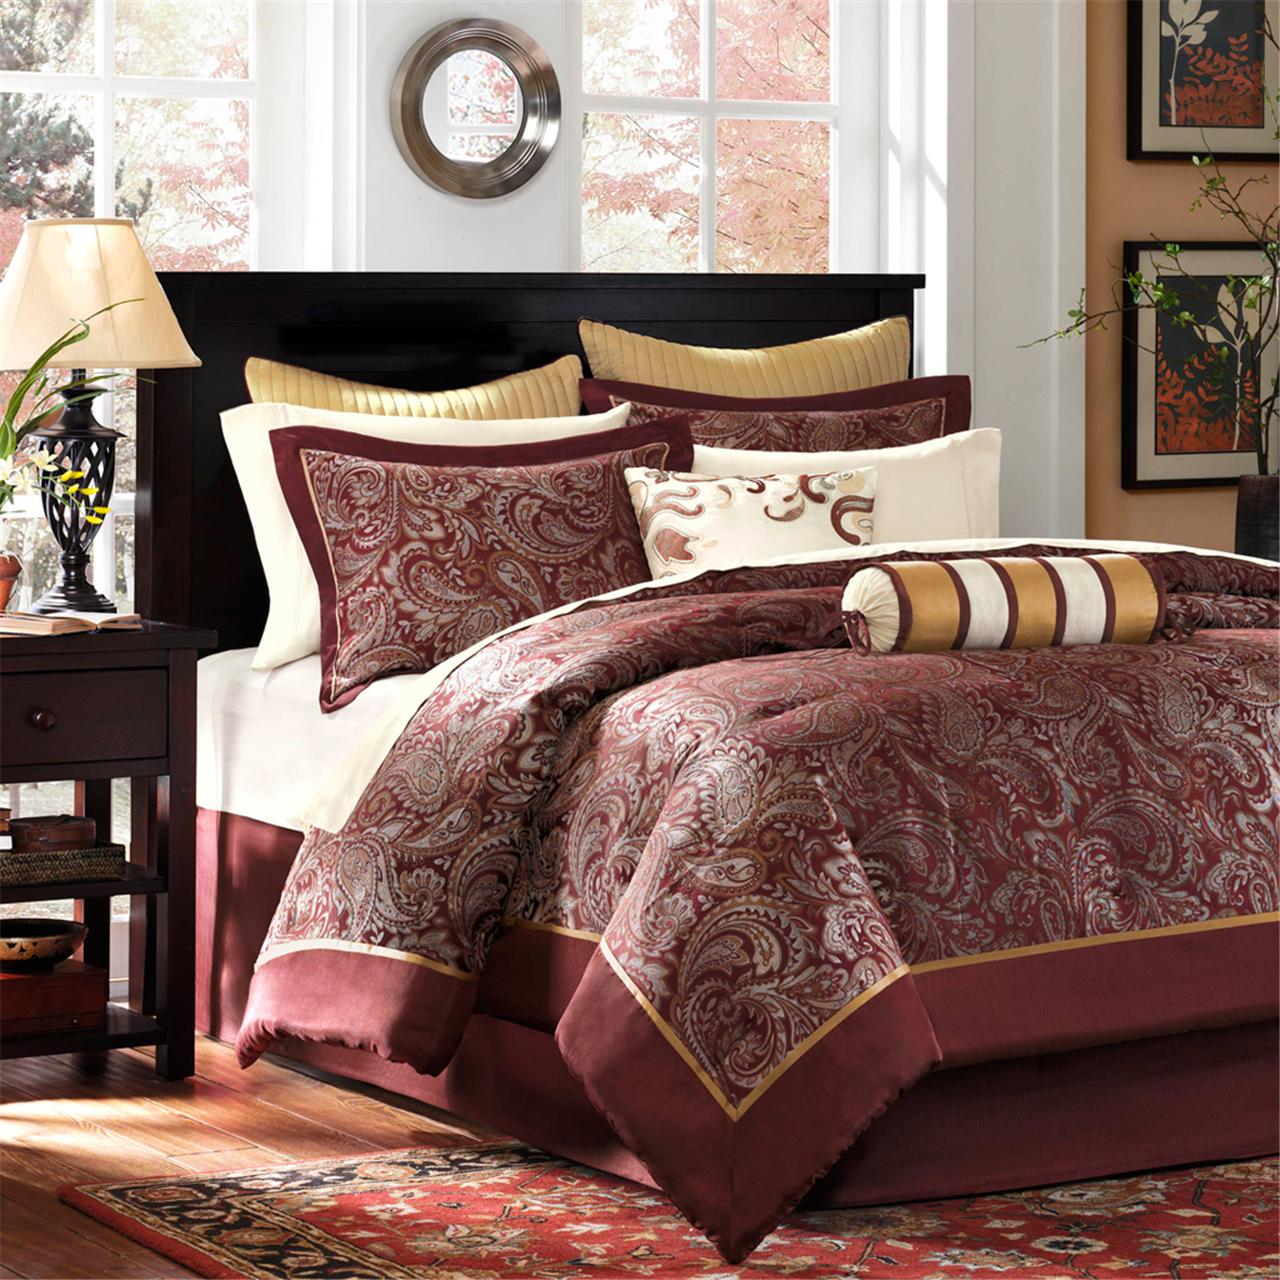 3 COLORS King BED IN A BAG JACQUARD FLORAL 9 PIECE COMFORTER SET Queen 